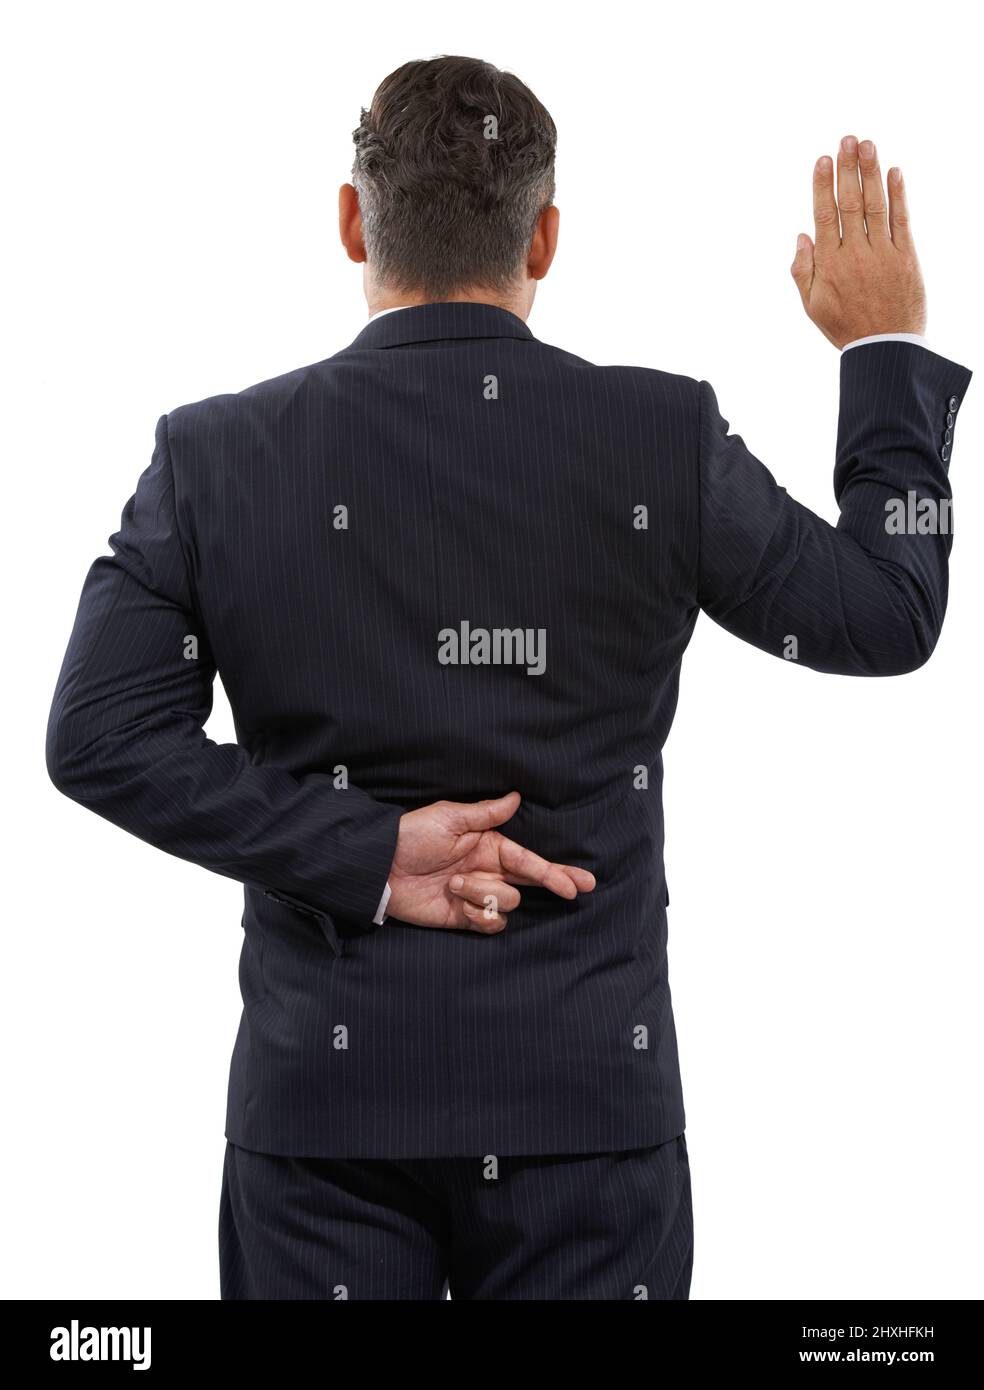 Politicians honour. Rearview of a mature man swearing an oath with his fingers crossed behind his back. Stock Photo